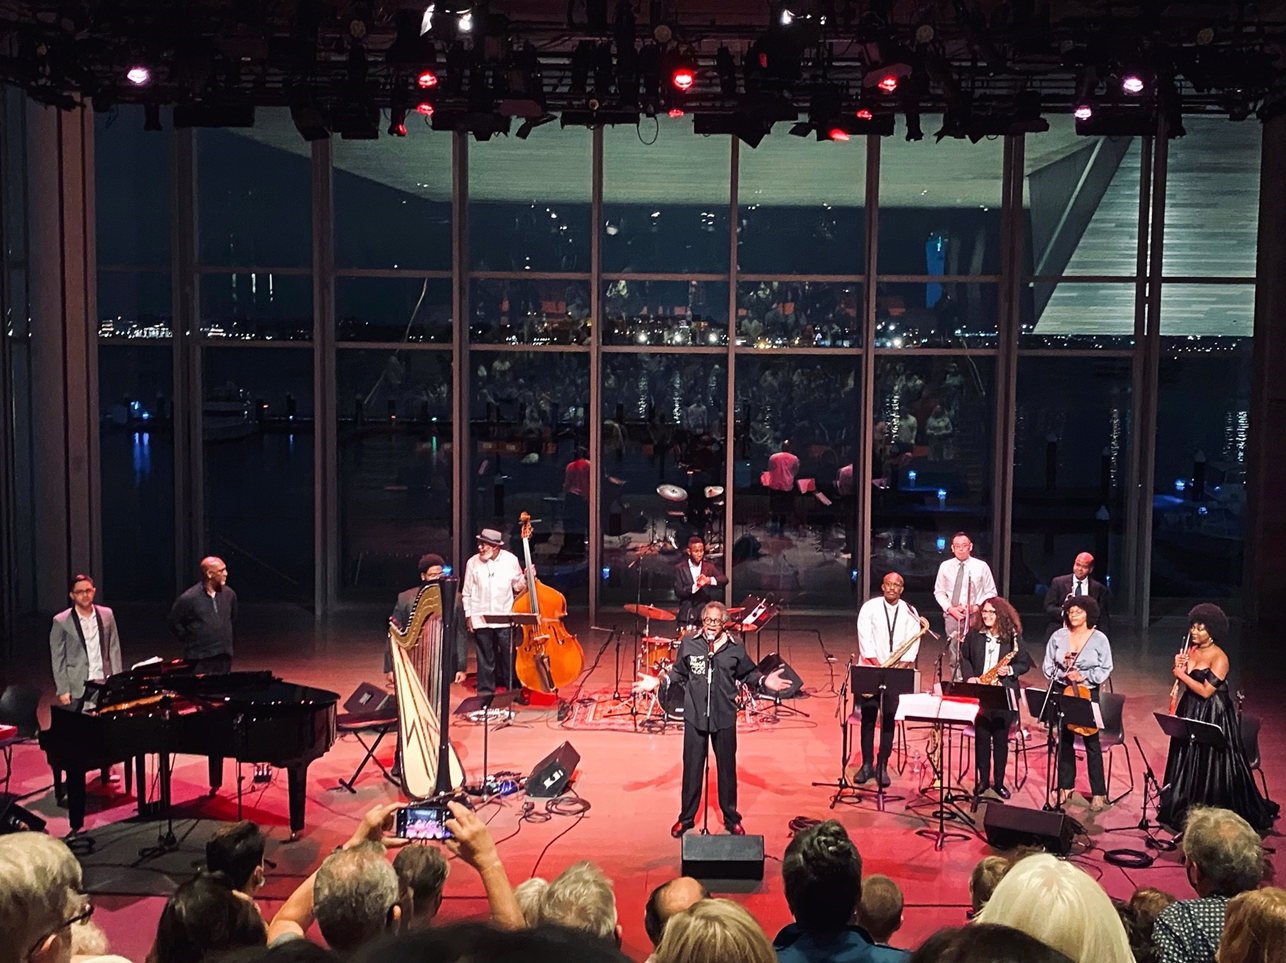 An array of musicians and instruments on the ICA's stage at night while a man speaks into the microphone